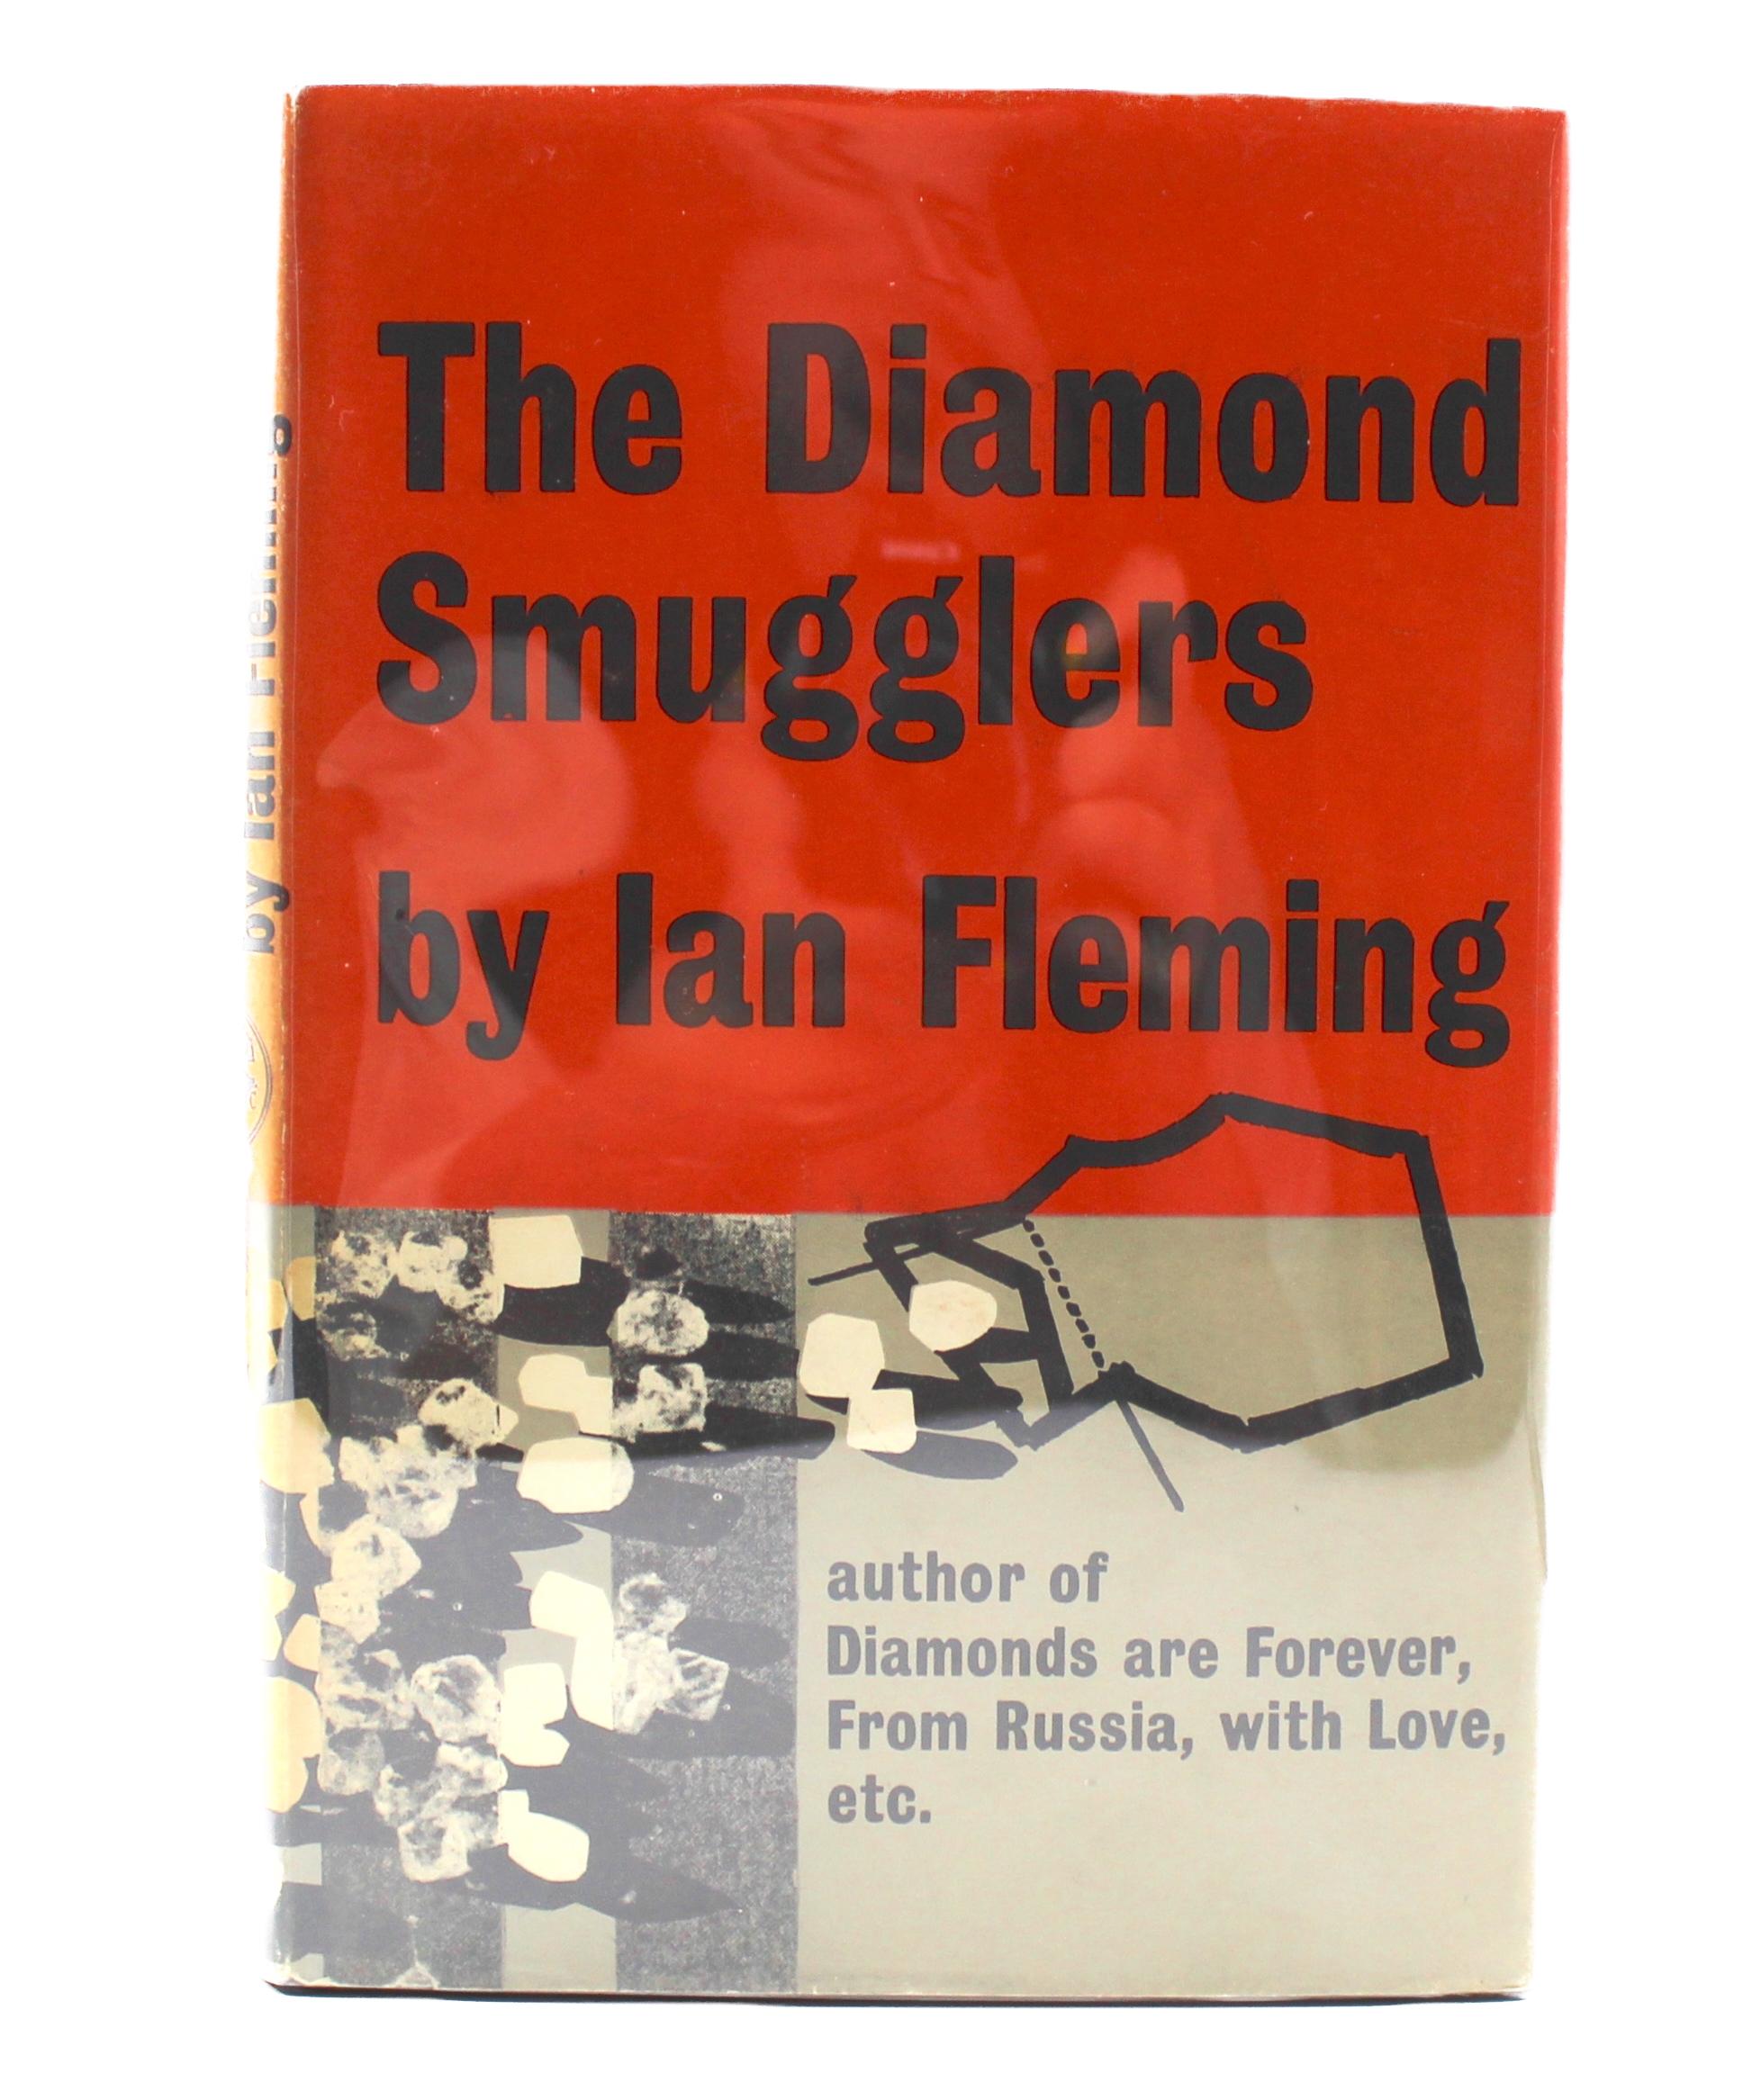 Fleming, Ian. The Diamond Smugglers. London: Jonathan Cape, 1957. Octavo. First edition, first impression. In the original dust jacket and original black cloth-textured boards. Presented with a new, archival clamshell. 

Presented is the first